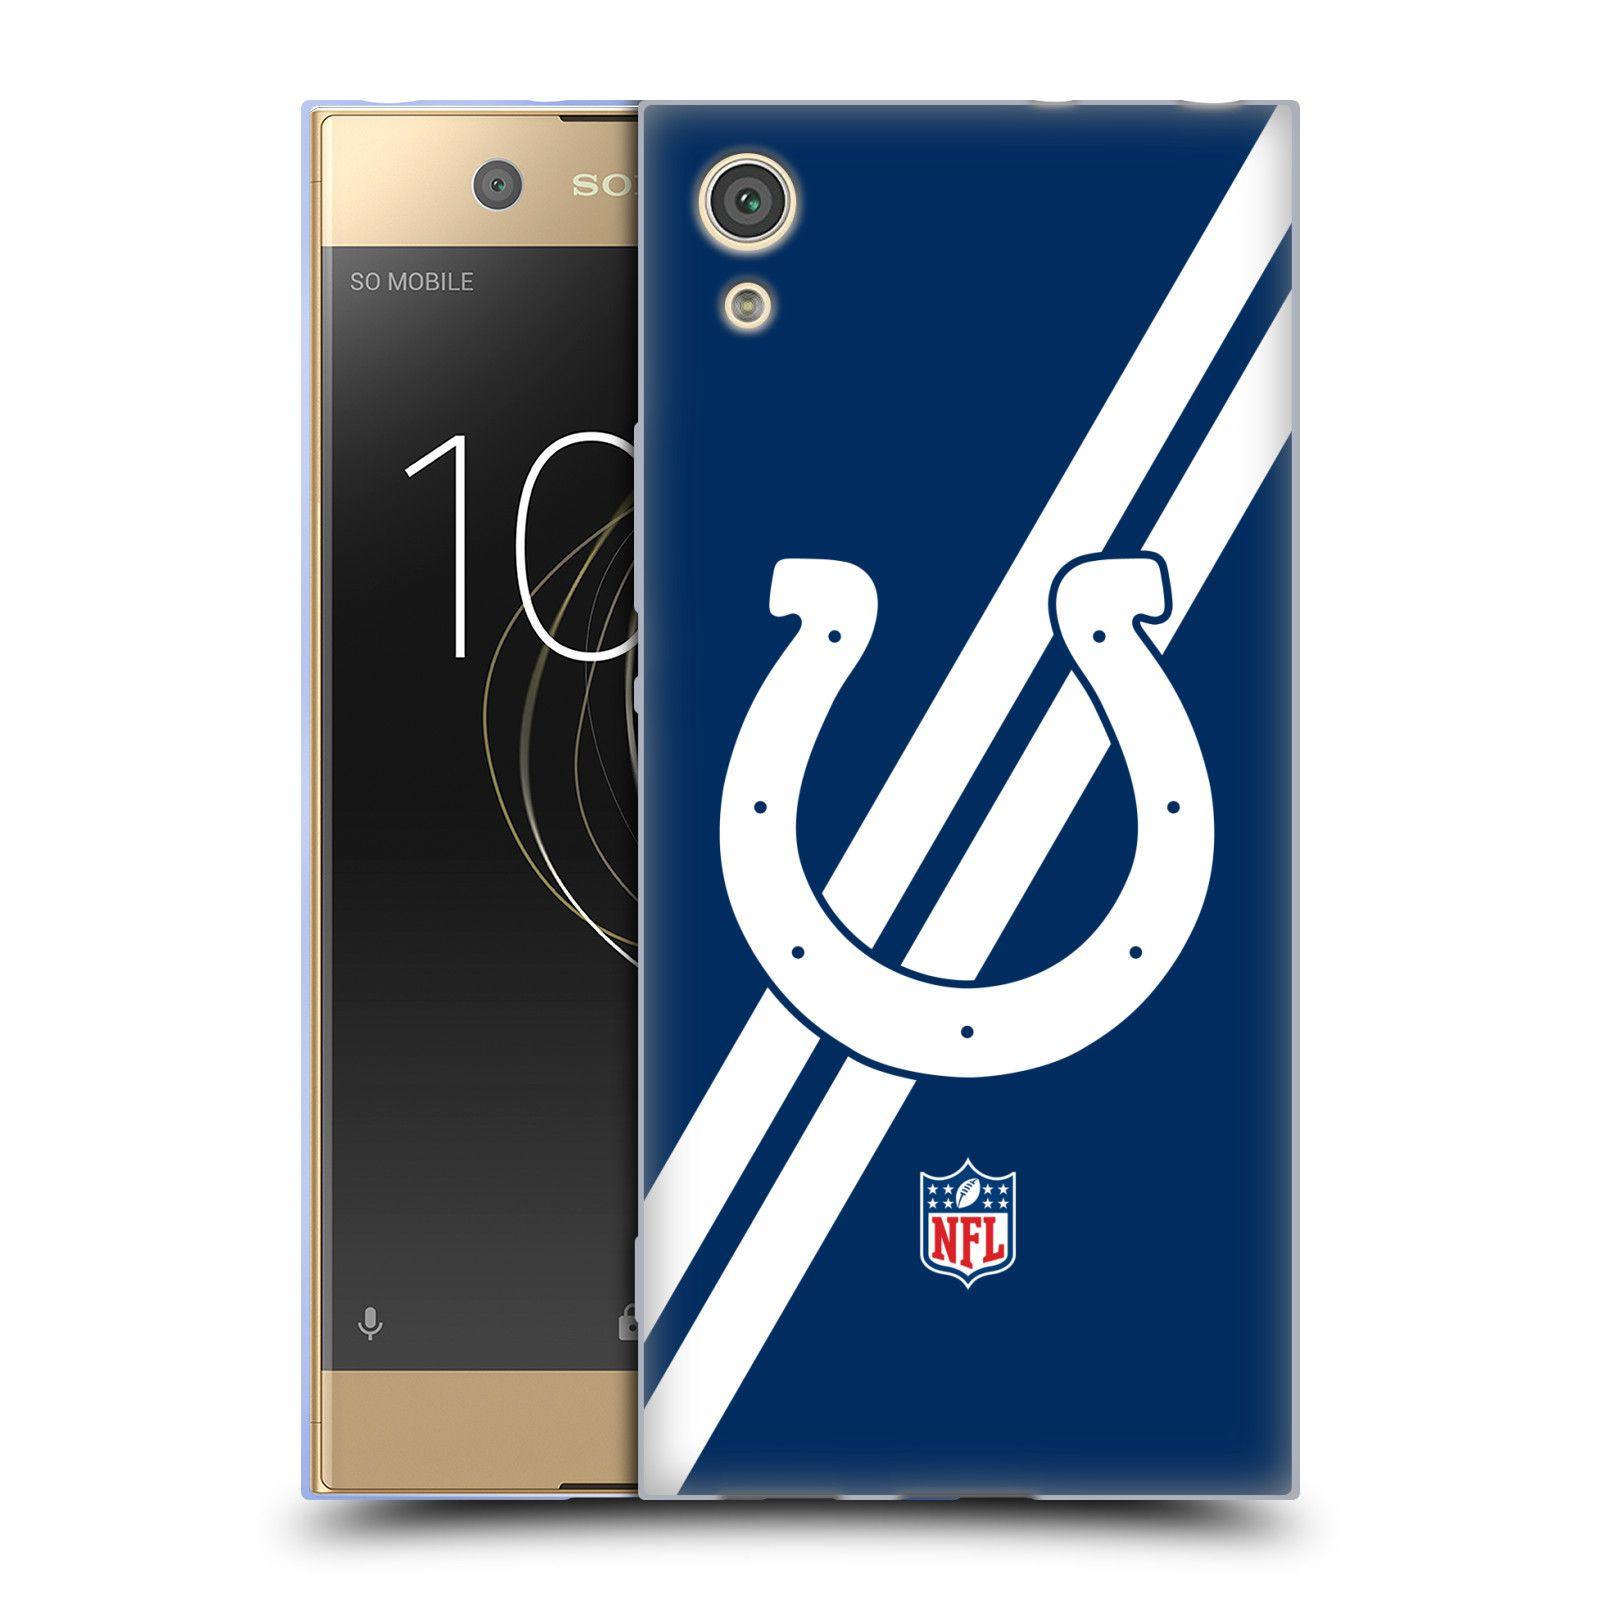 Sony Phone Logo - OFFICIAL NFL INDIANAPOLIS COLTS LOGO SOFT GEL CASE FOR SONY PHONES 1